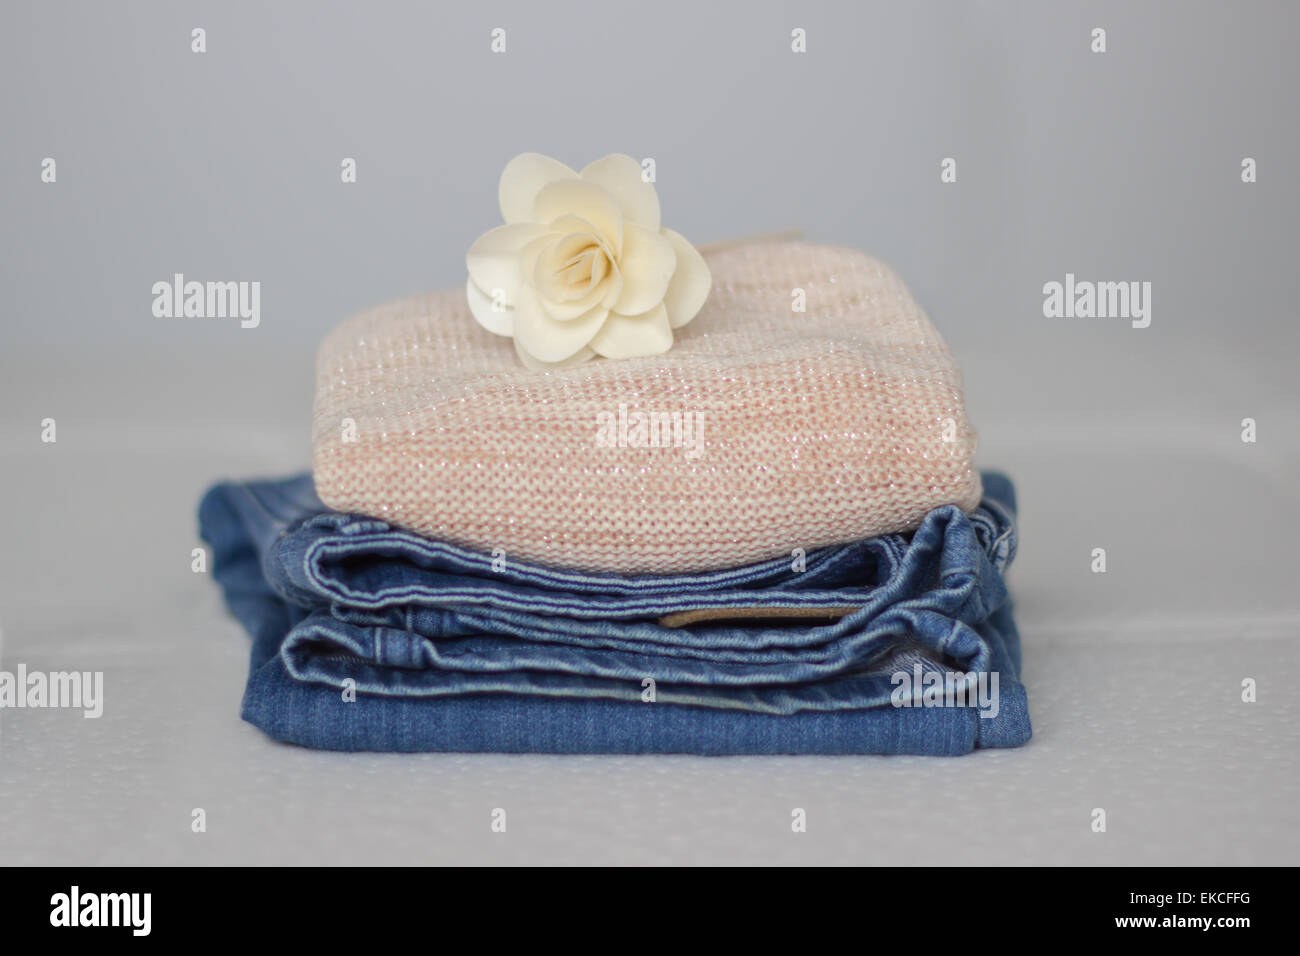 A pile of clothes with a flower on top Stock Photo